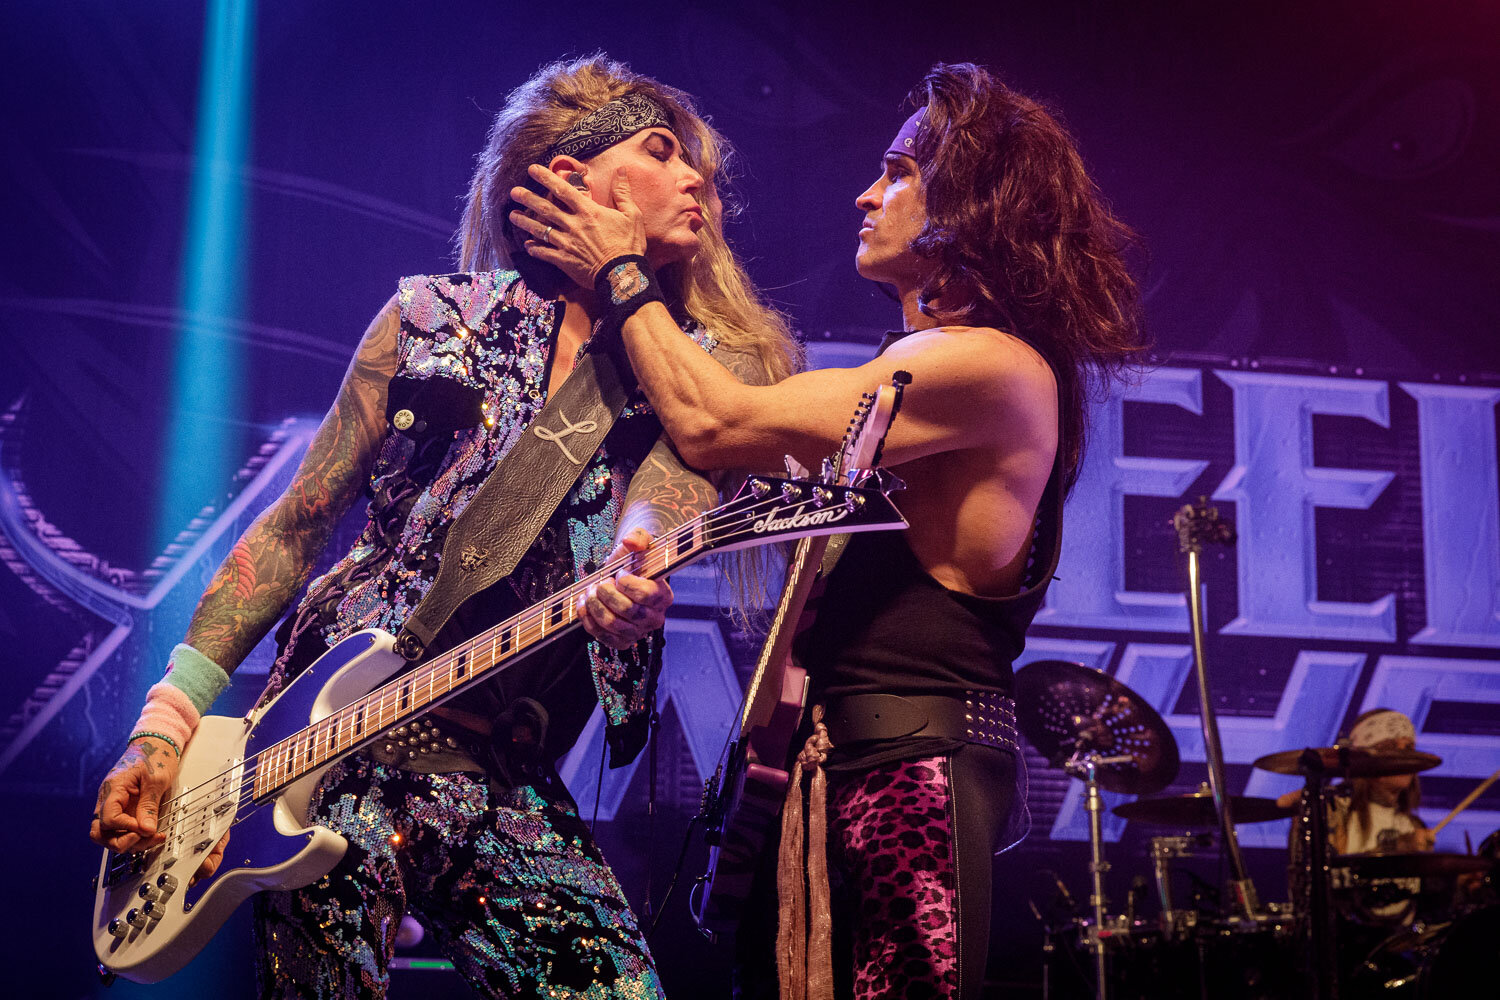  Steel Panther at Victoria Warehouse in Manchester on February 9th 2020 ©Johann Wierzbicki | ROCKFLESH 